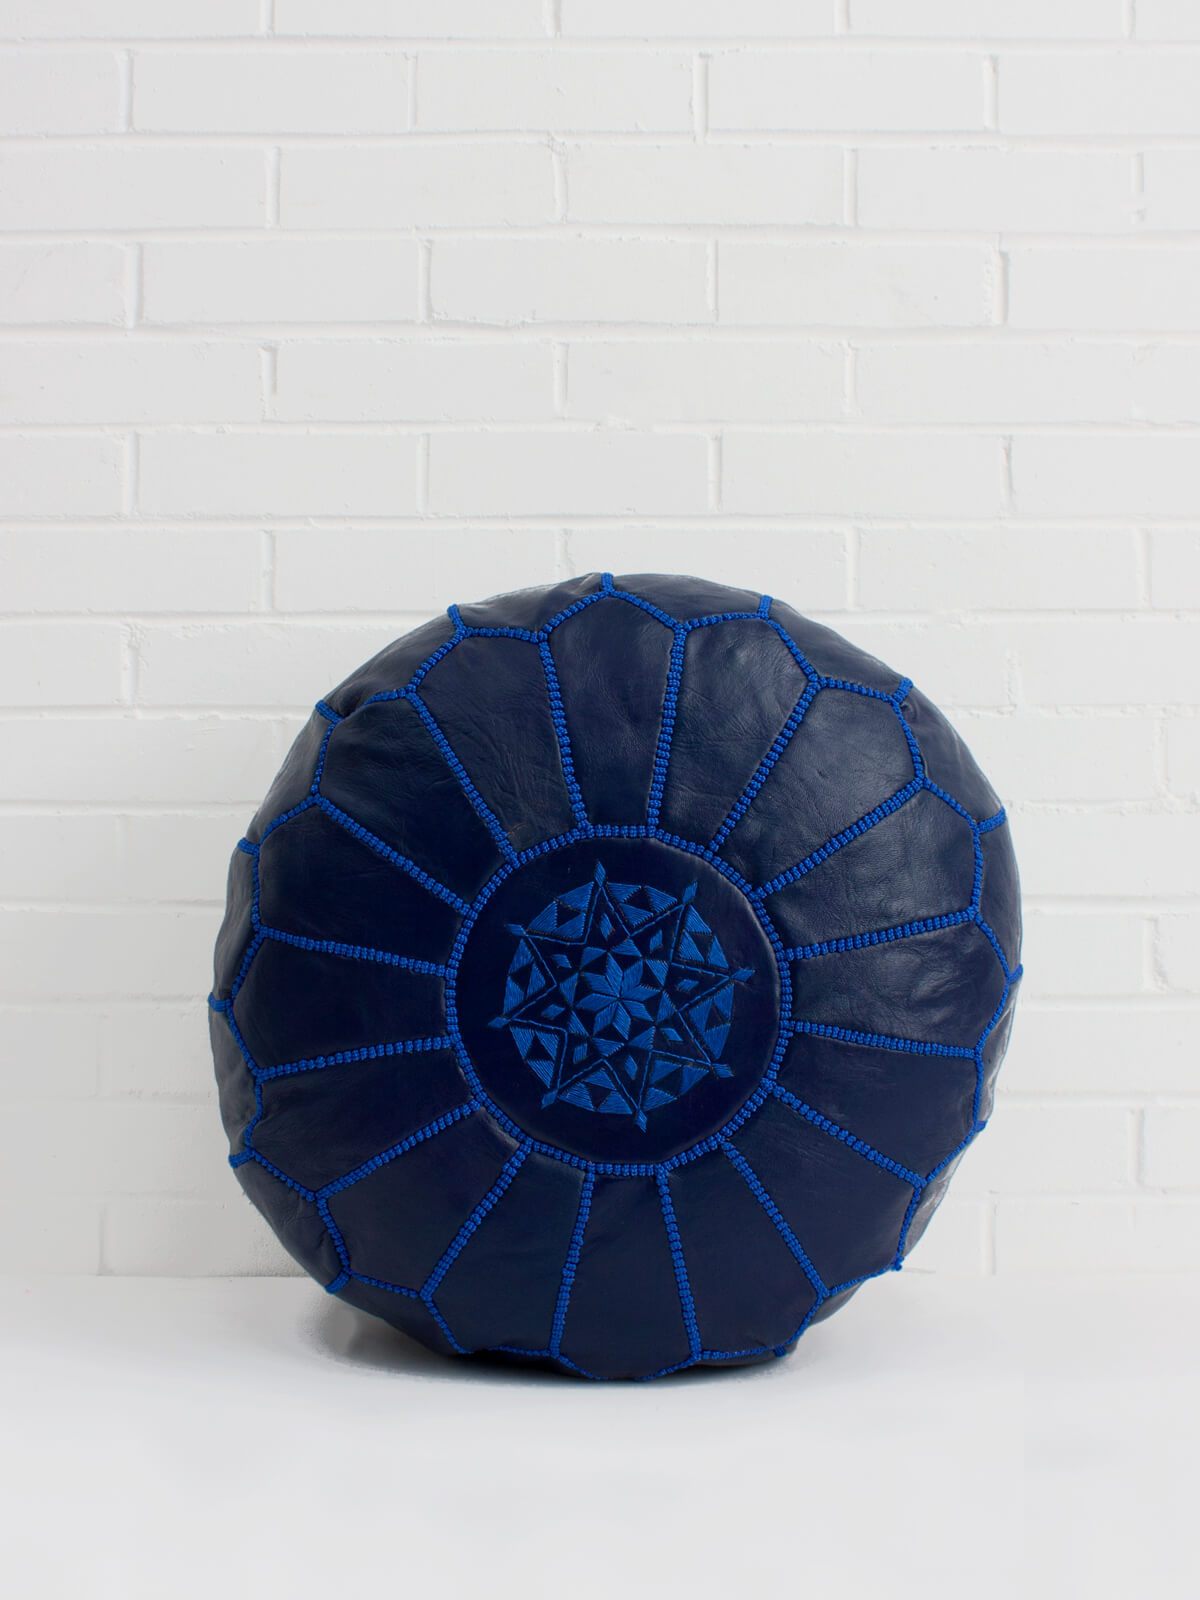 MOROCCAN LEATHER POUF BLUE - craftkechbrand